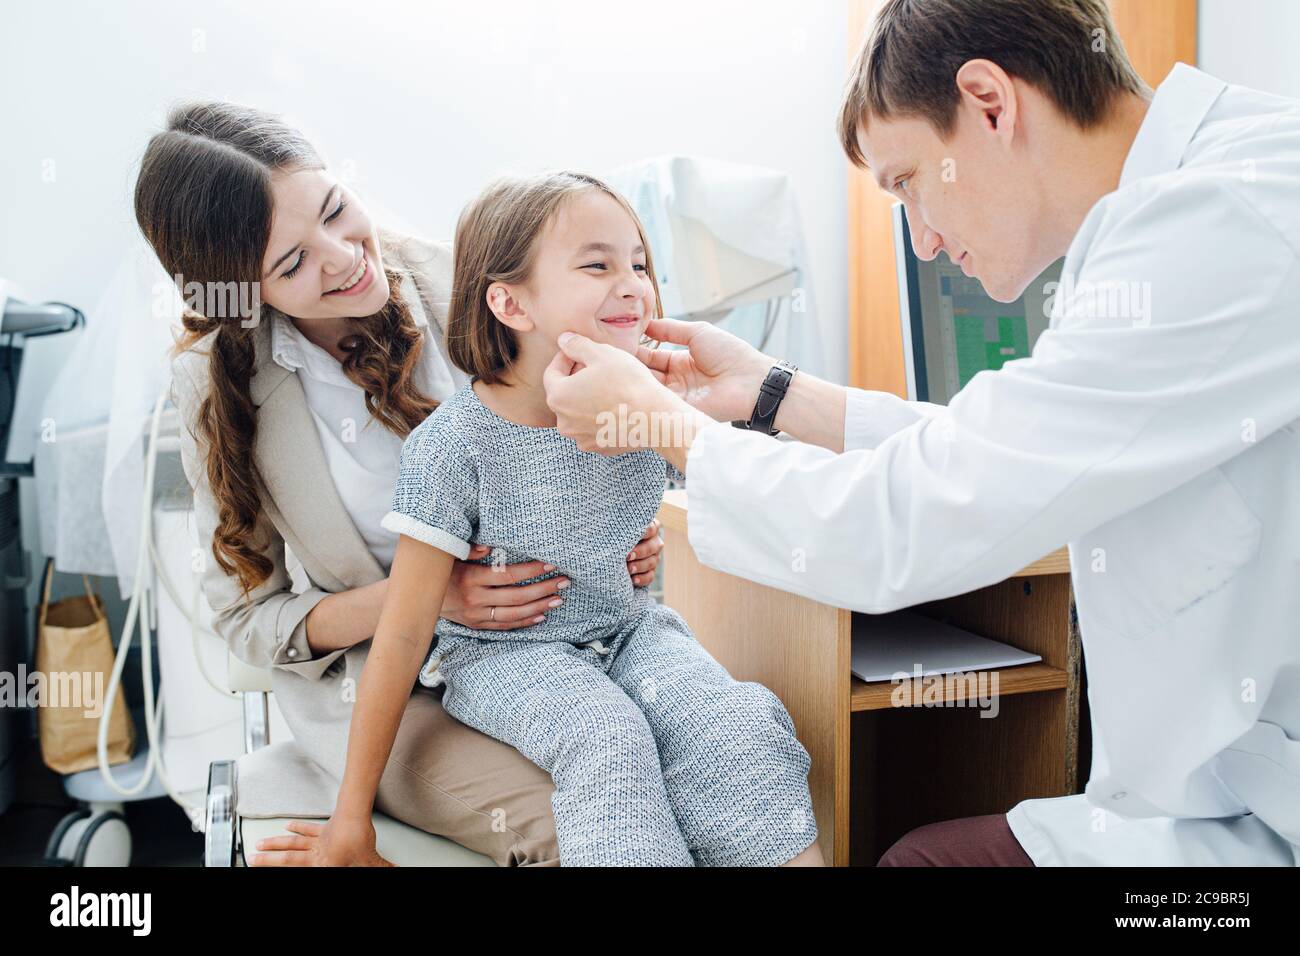 Social little girl in being examined by pediatrician, sitting on mom's lap Stock Photo